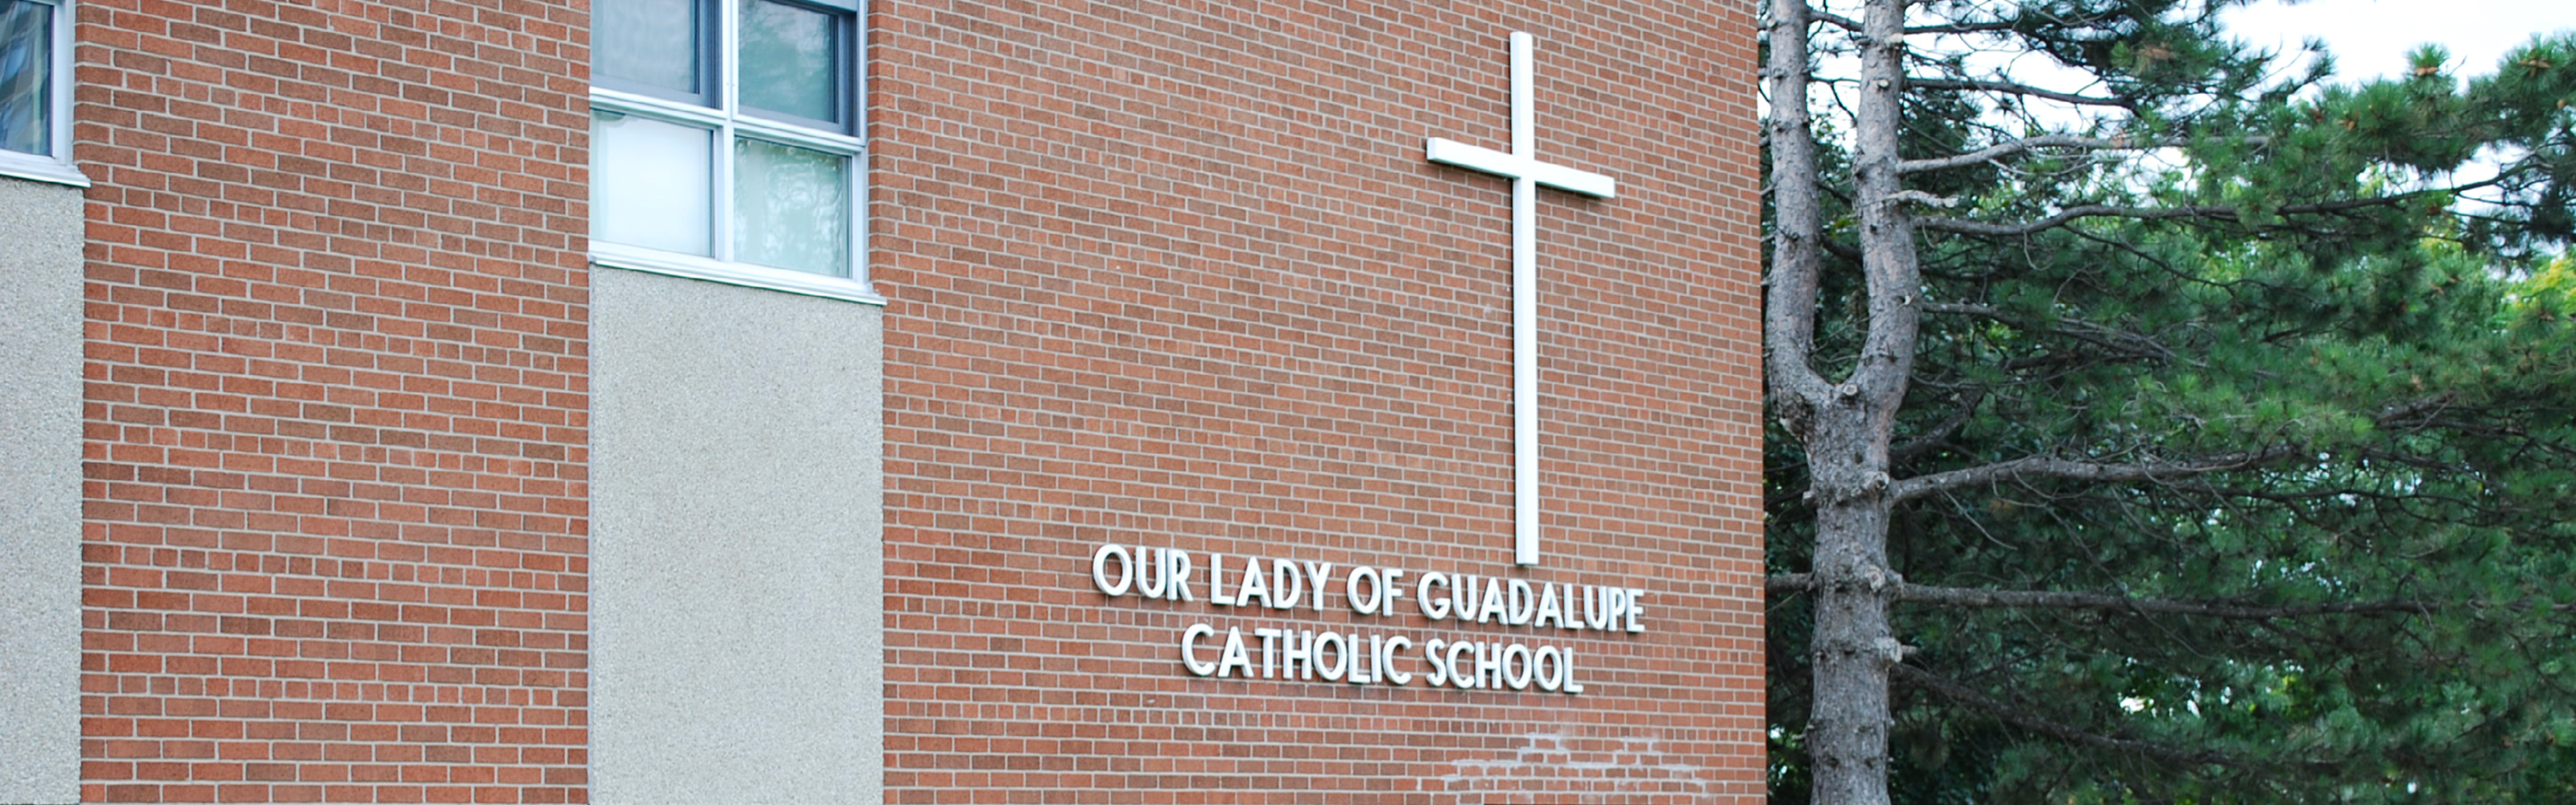 The front of the Our Lady of Guadalupe Catholic School building.